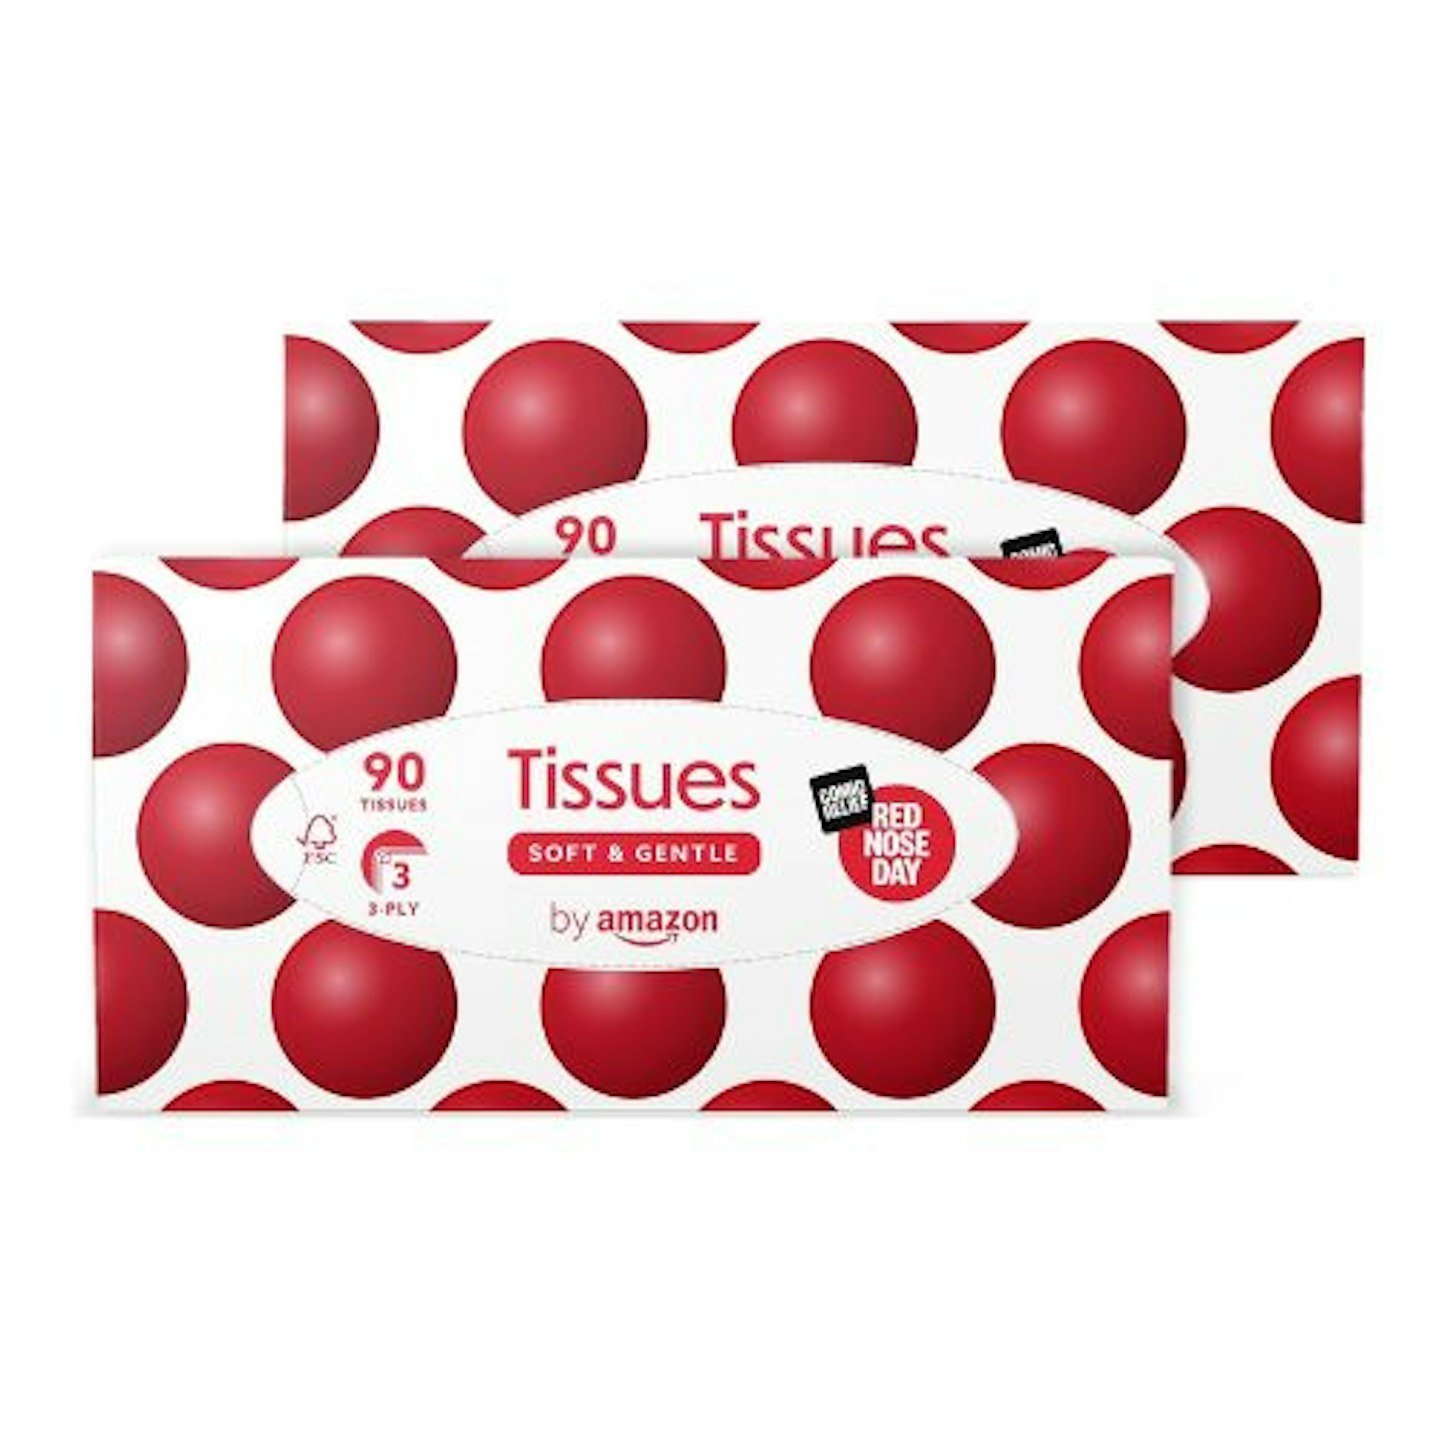 by Amazon Red Nose Day Facial Tissues, 3-ply 90 sheets, Twin Pack (2 pack), Lotioned tissues – on behalf of Comic Relief